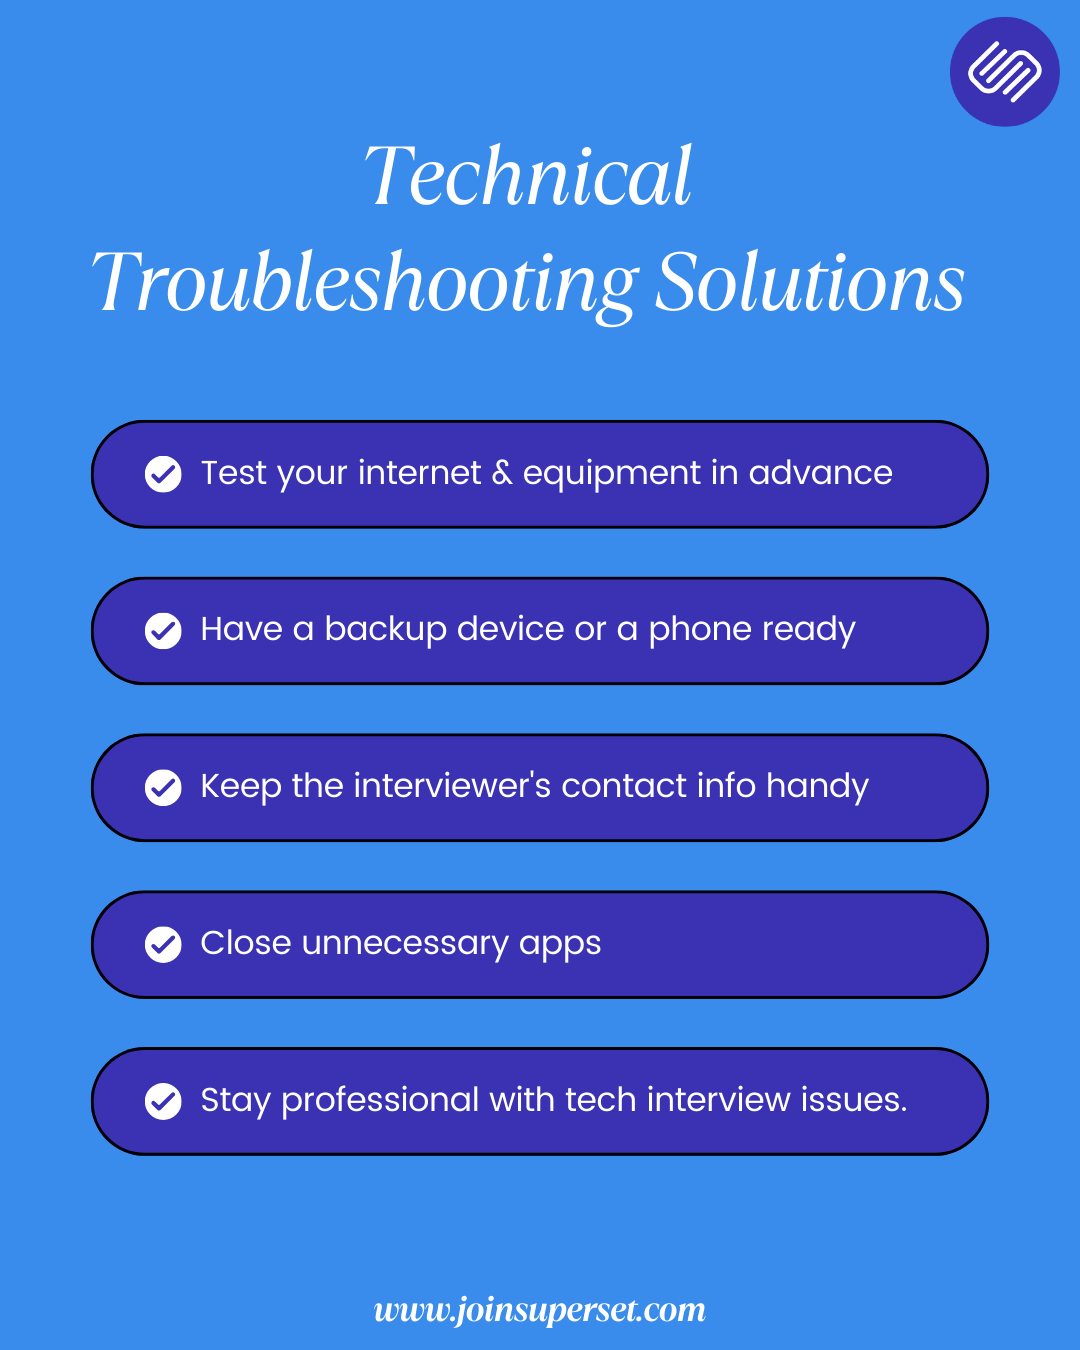 Technical interview solutions